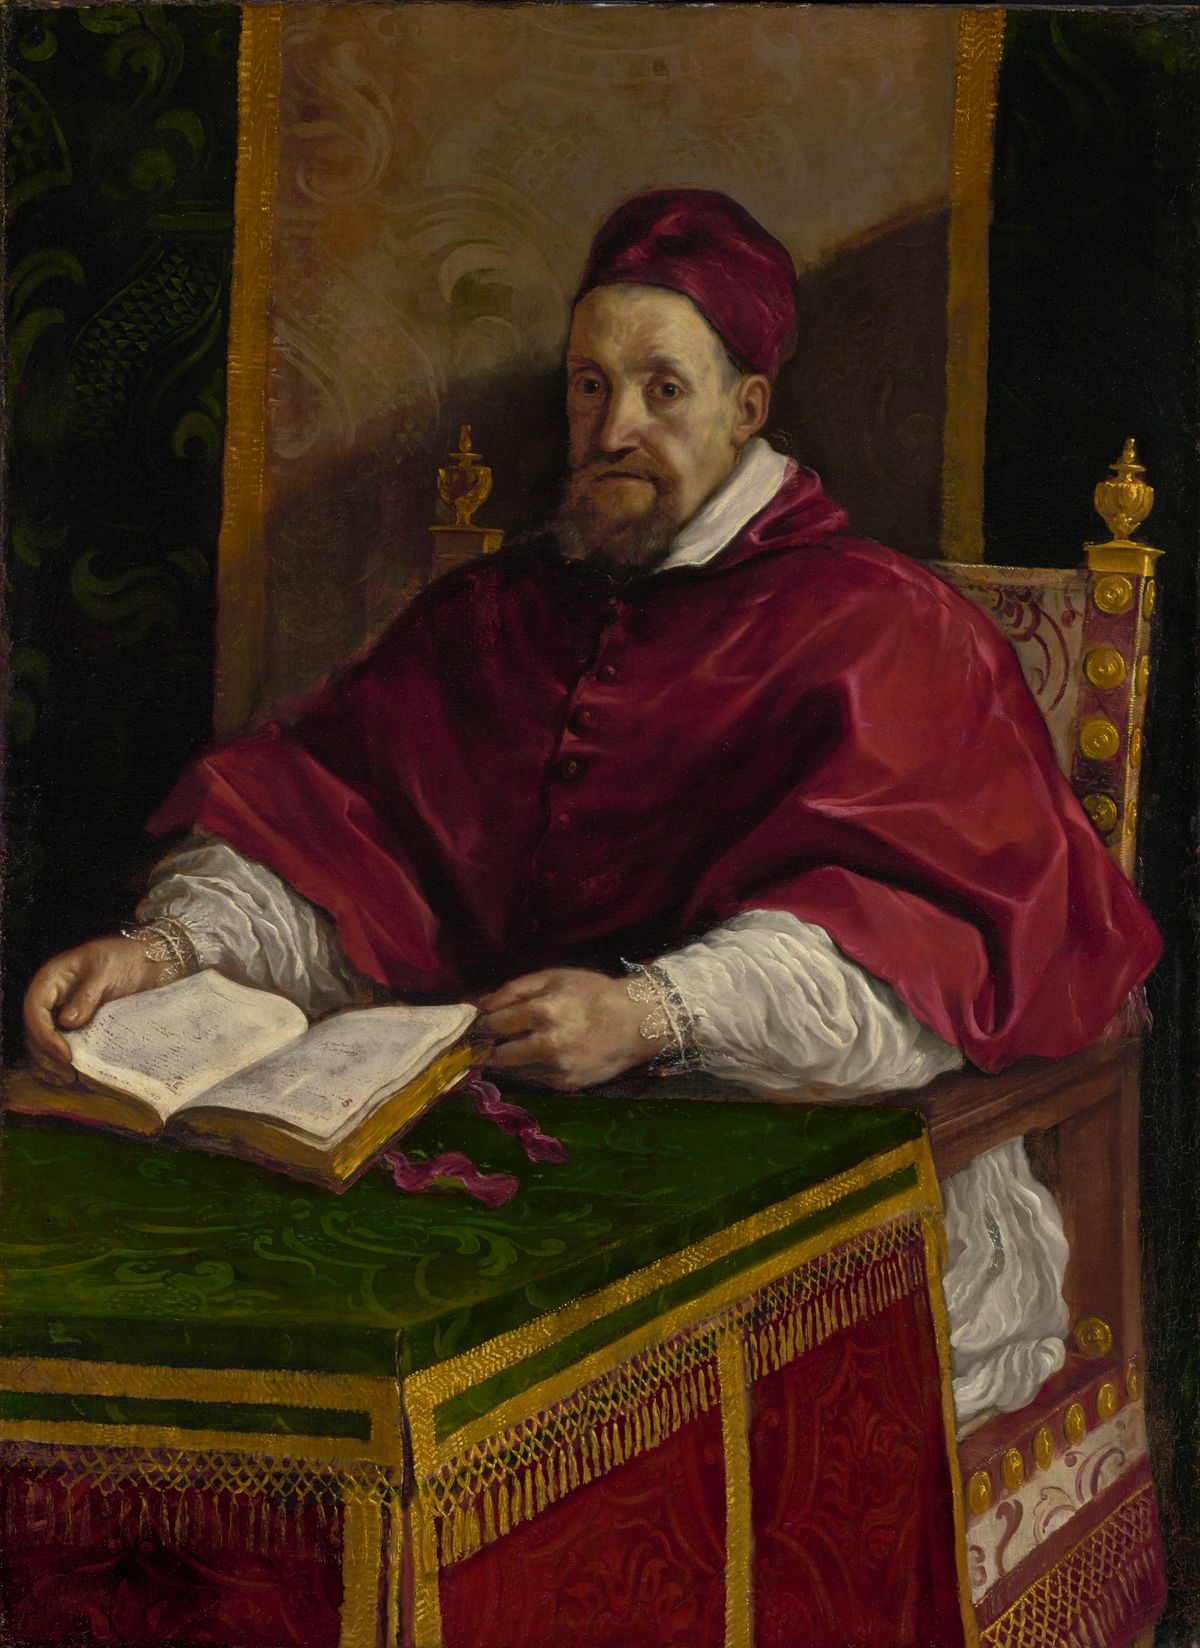 Pope Gregory XV by Guercino (1622) - Public Domain Catholic Painting